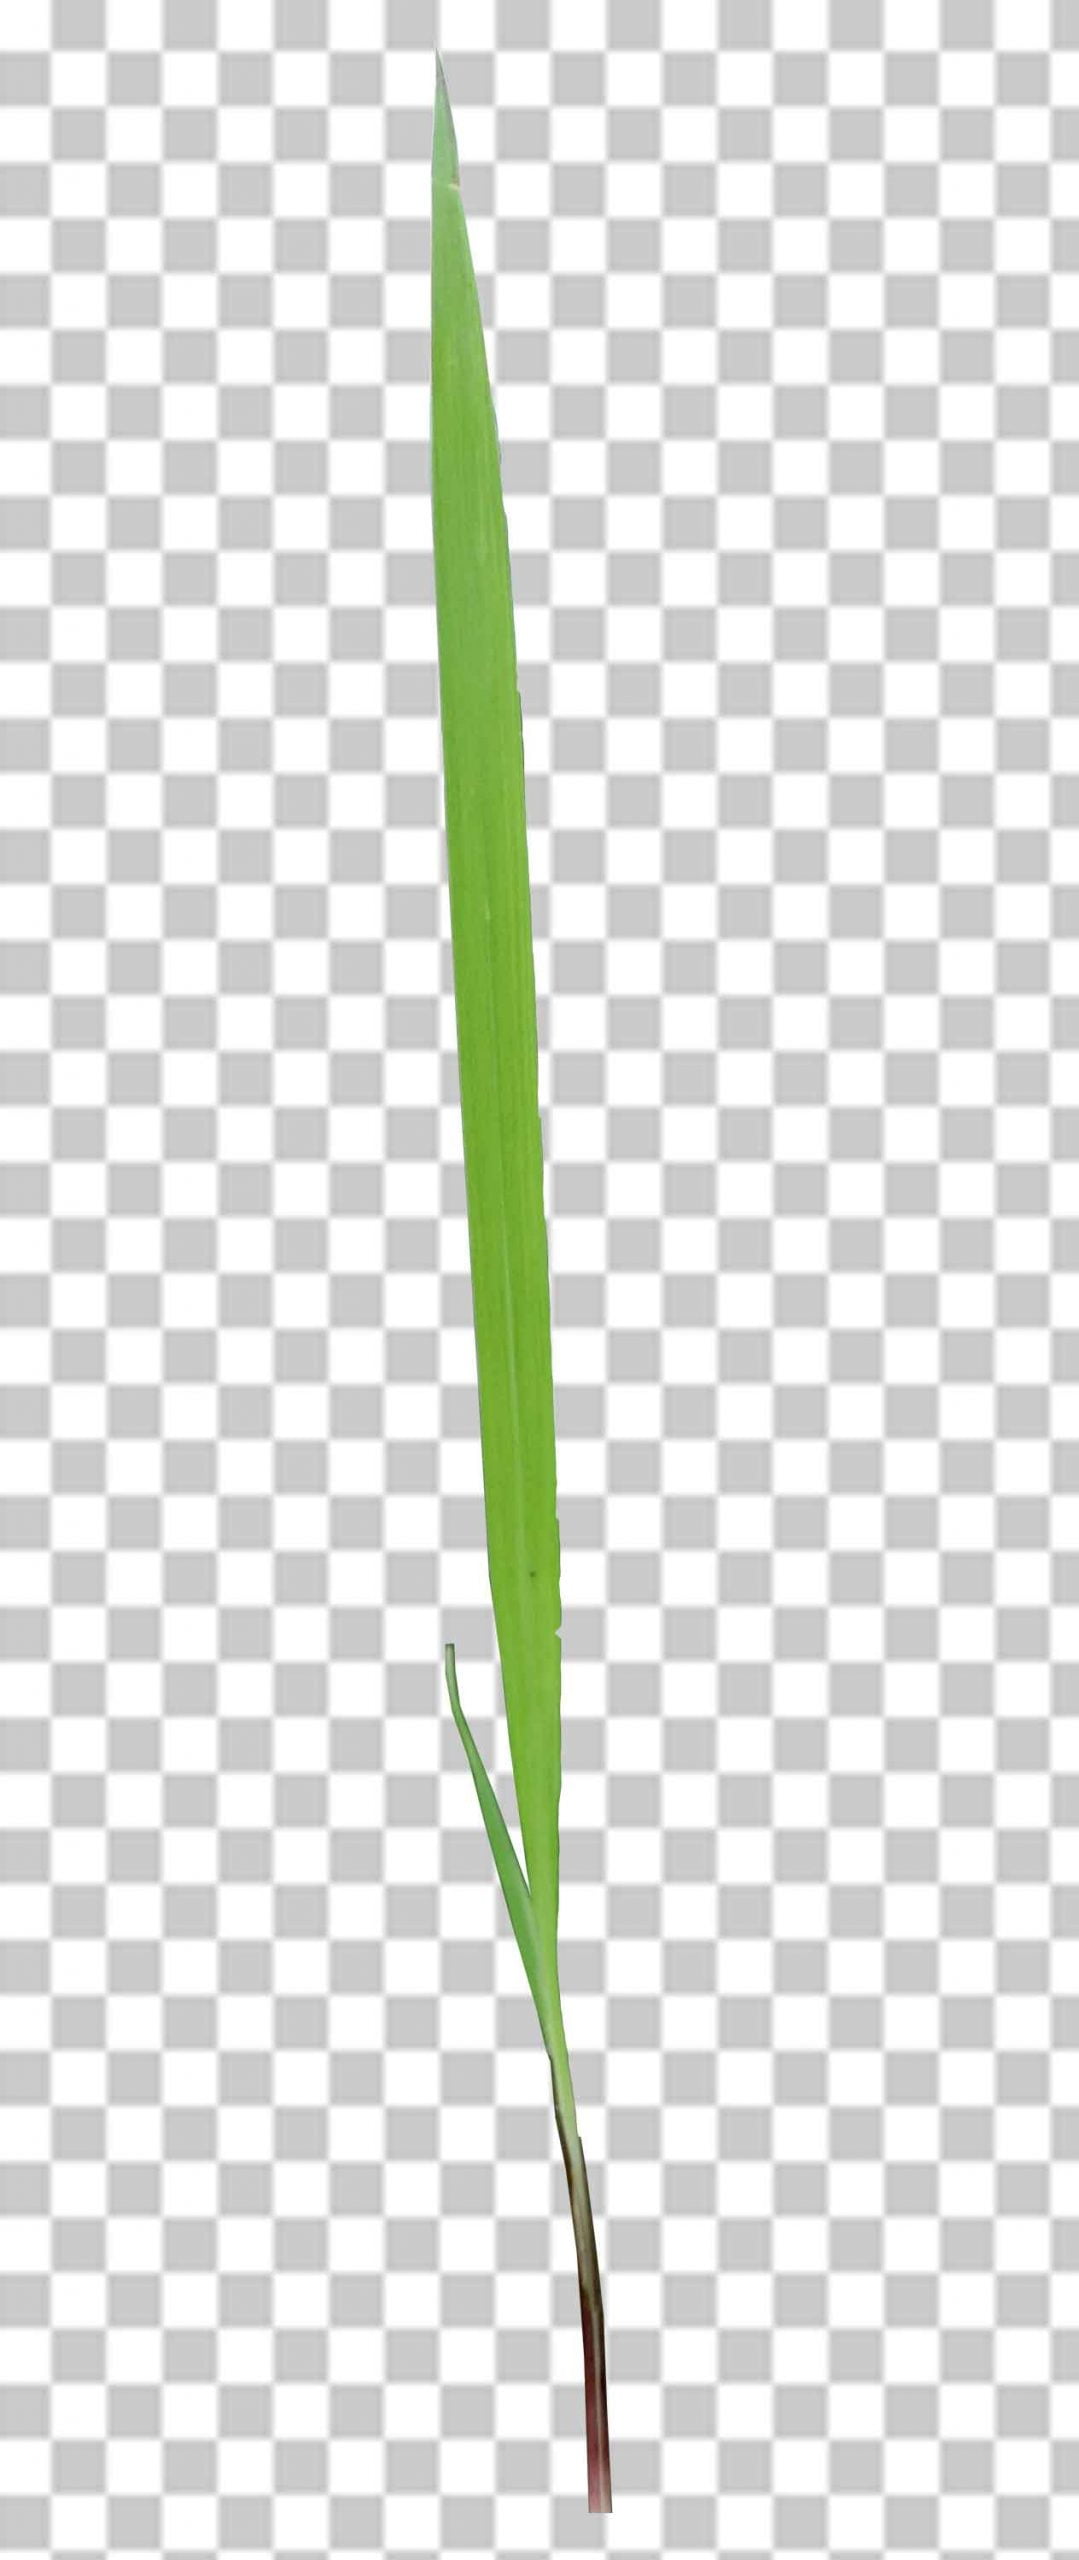 Single Grass Png Transparent Image Photo Free Download